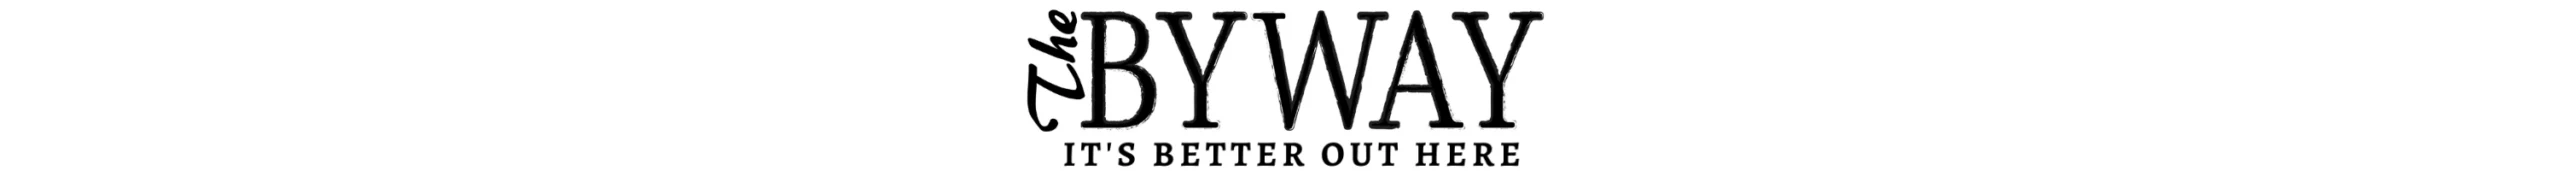 Logo: The Byway - It's Better Out Here